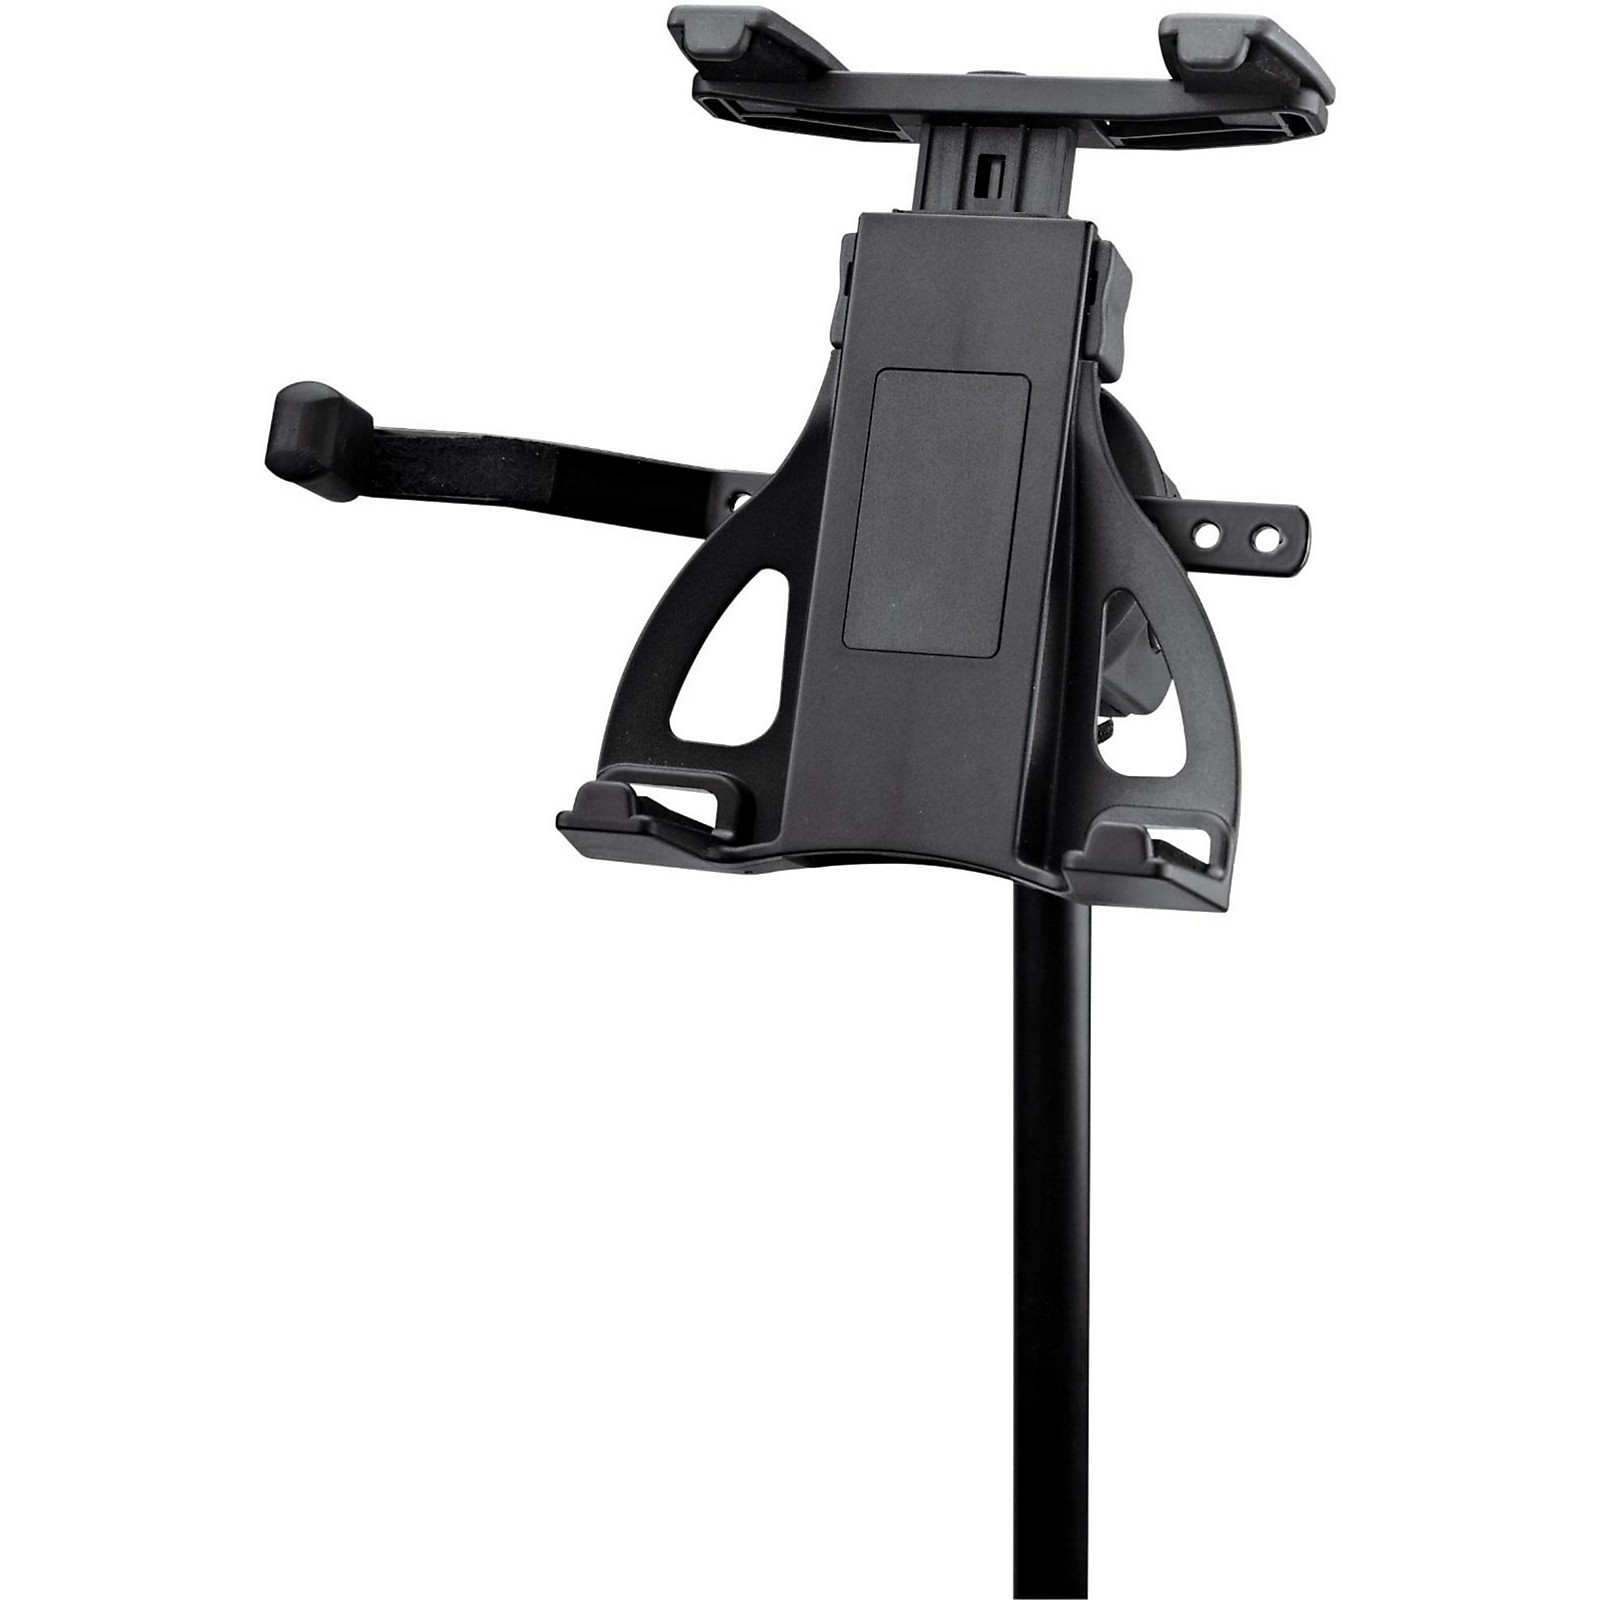 Ganata Music Microphone Stand Holder Mount for 7 inch-11 inch Tablet 2 3 5 Sam Tab Nexus 7